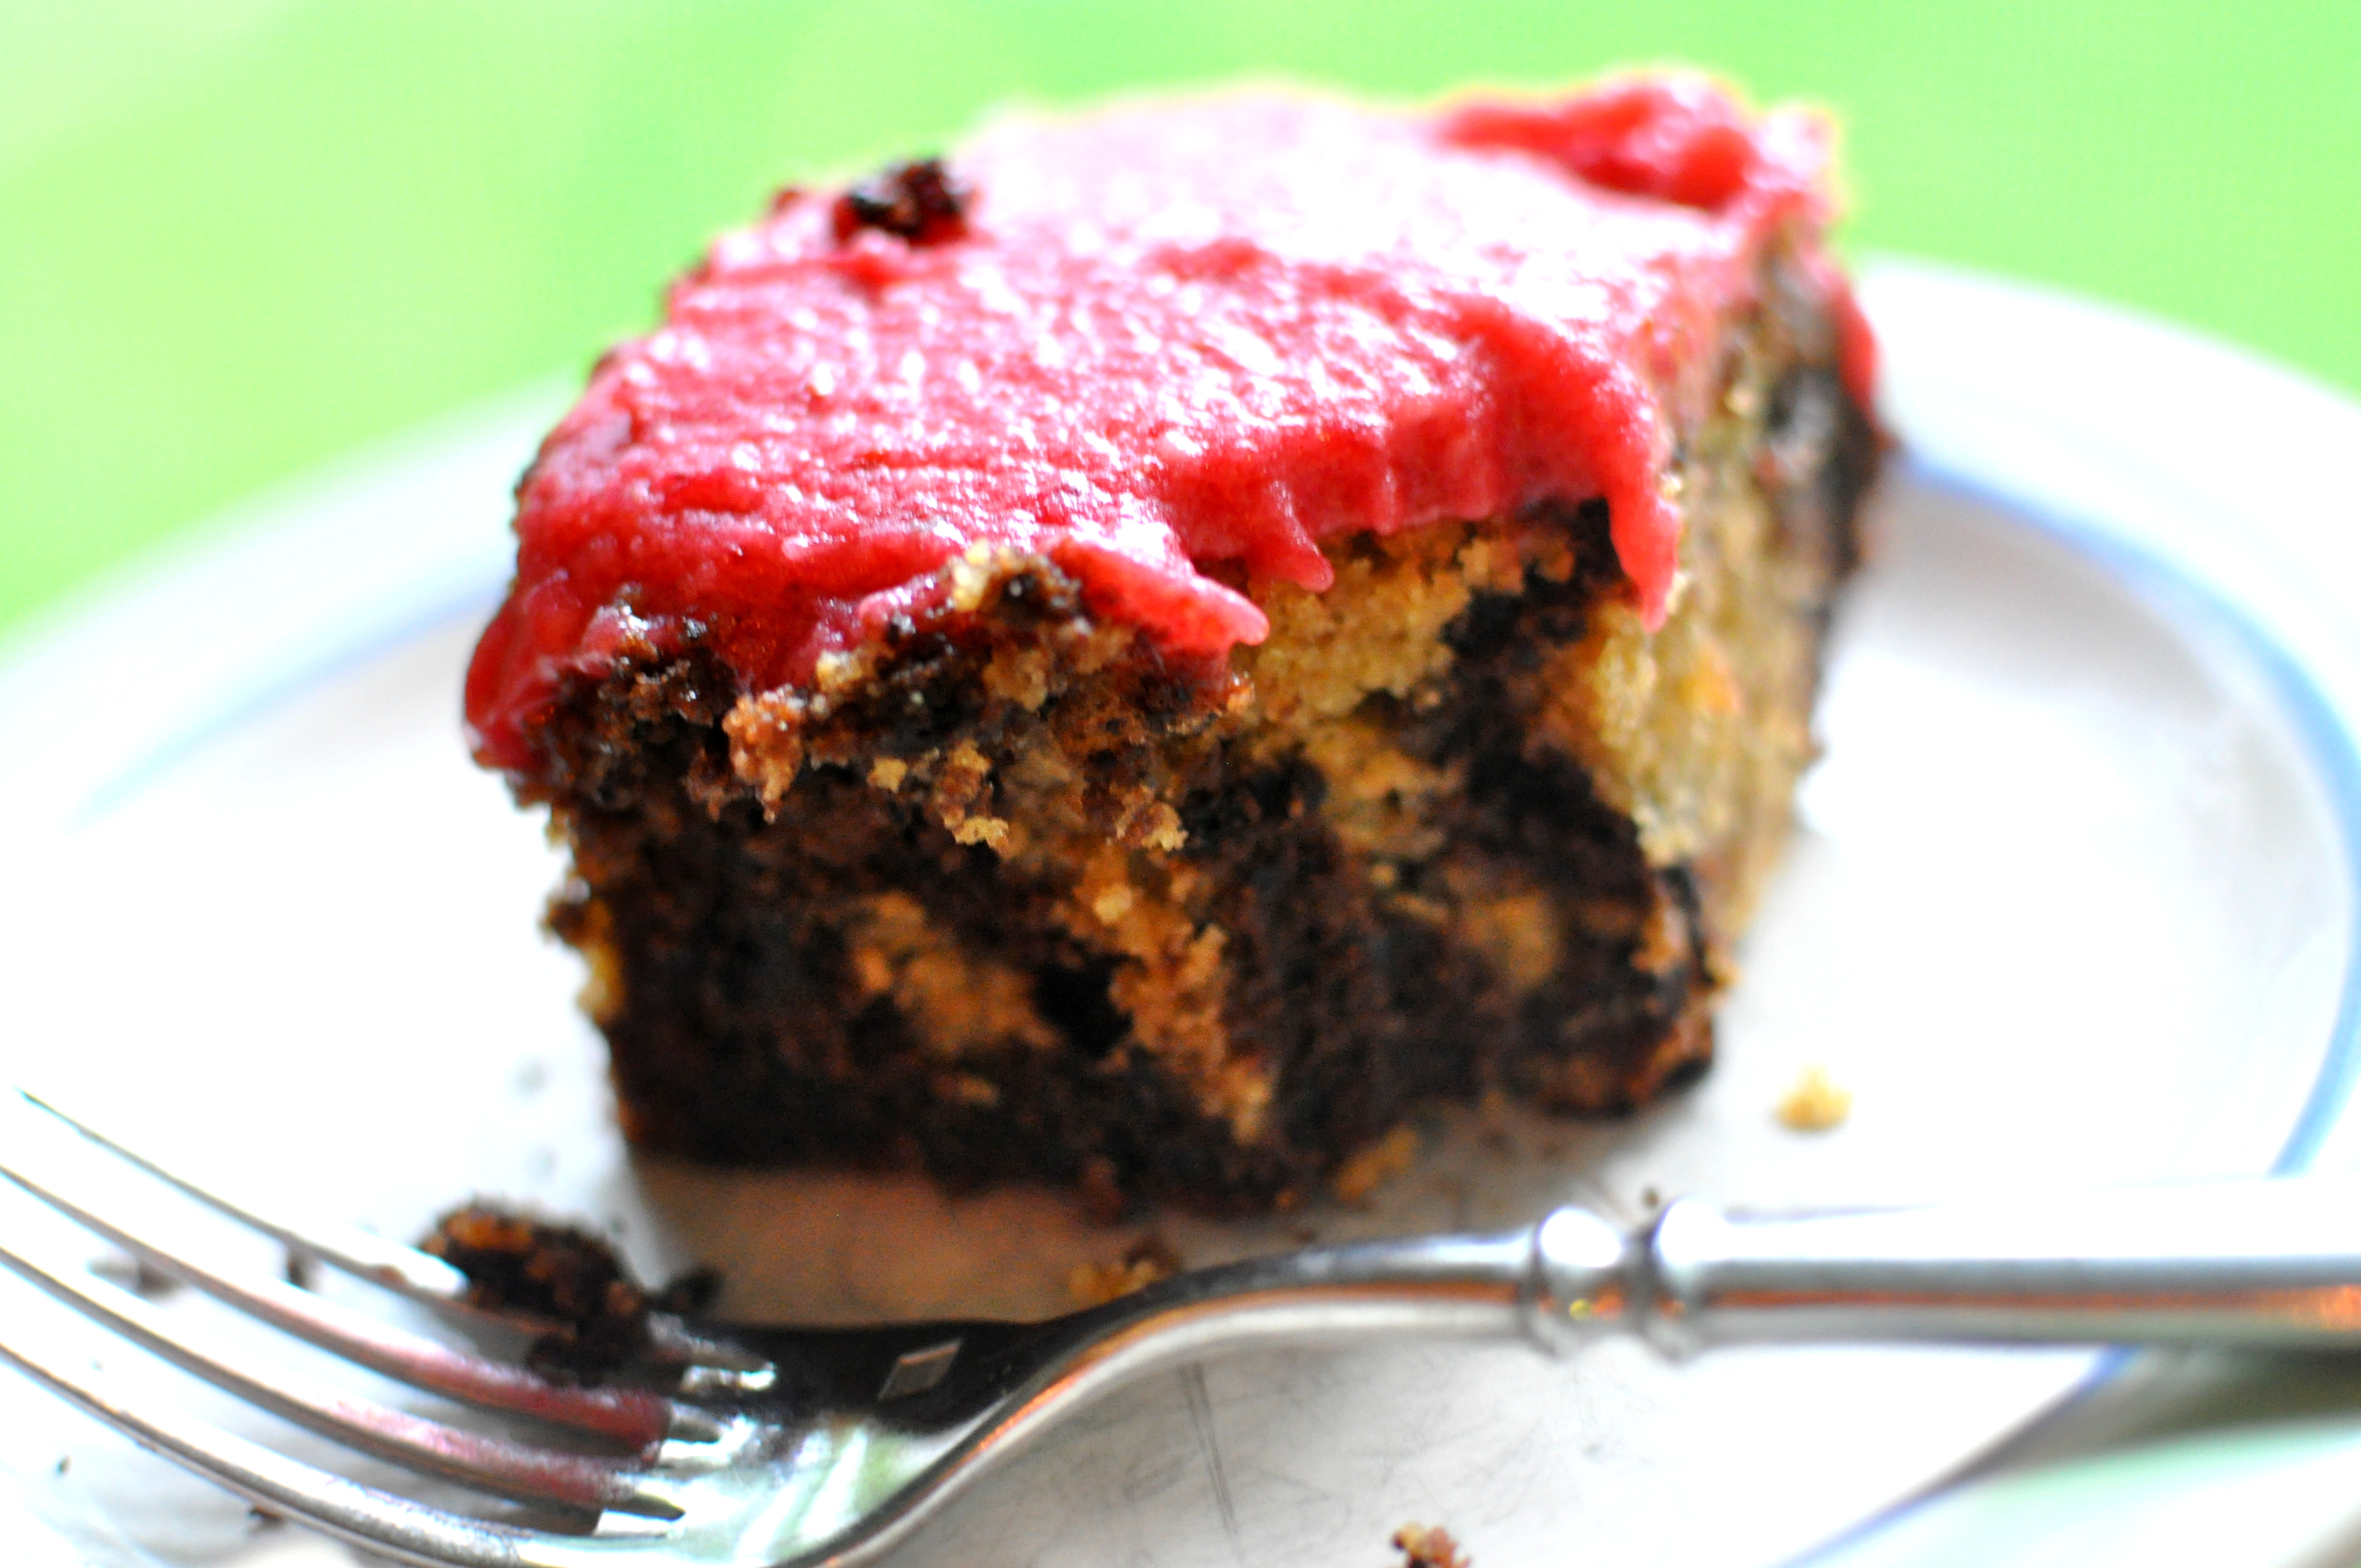 Chocolate Vanilla Marble Cake with Raspberry Frosting